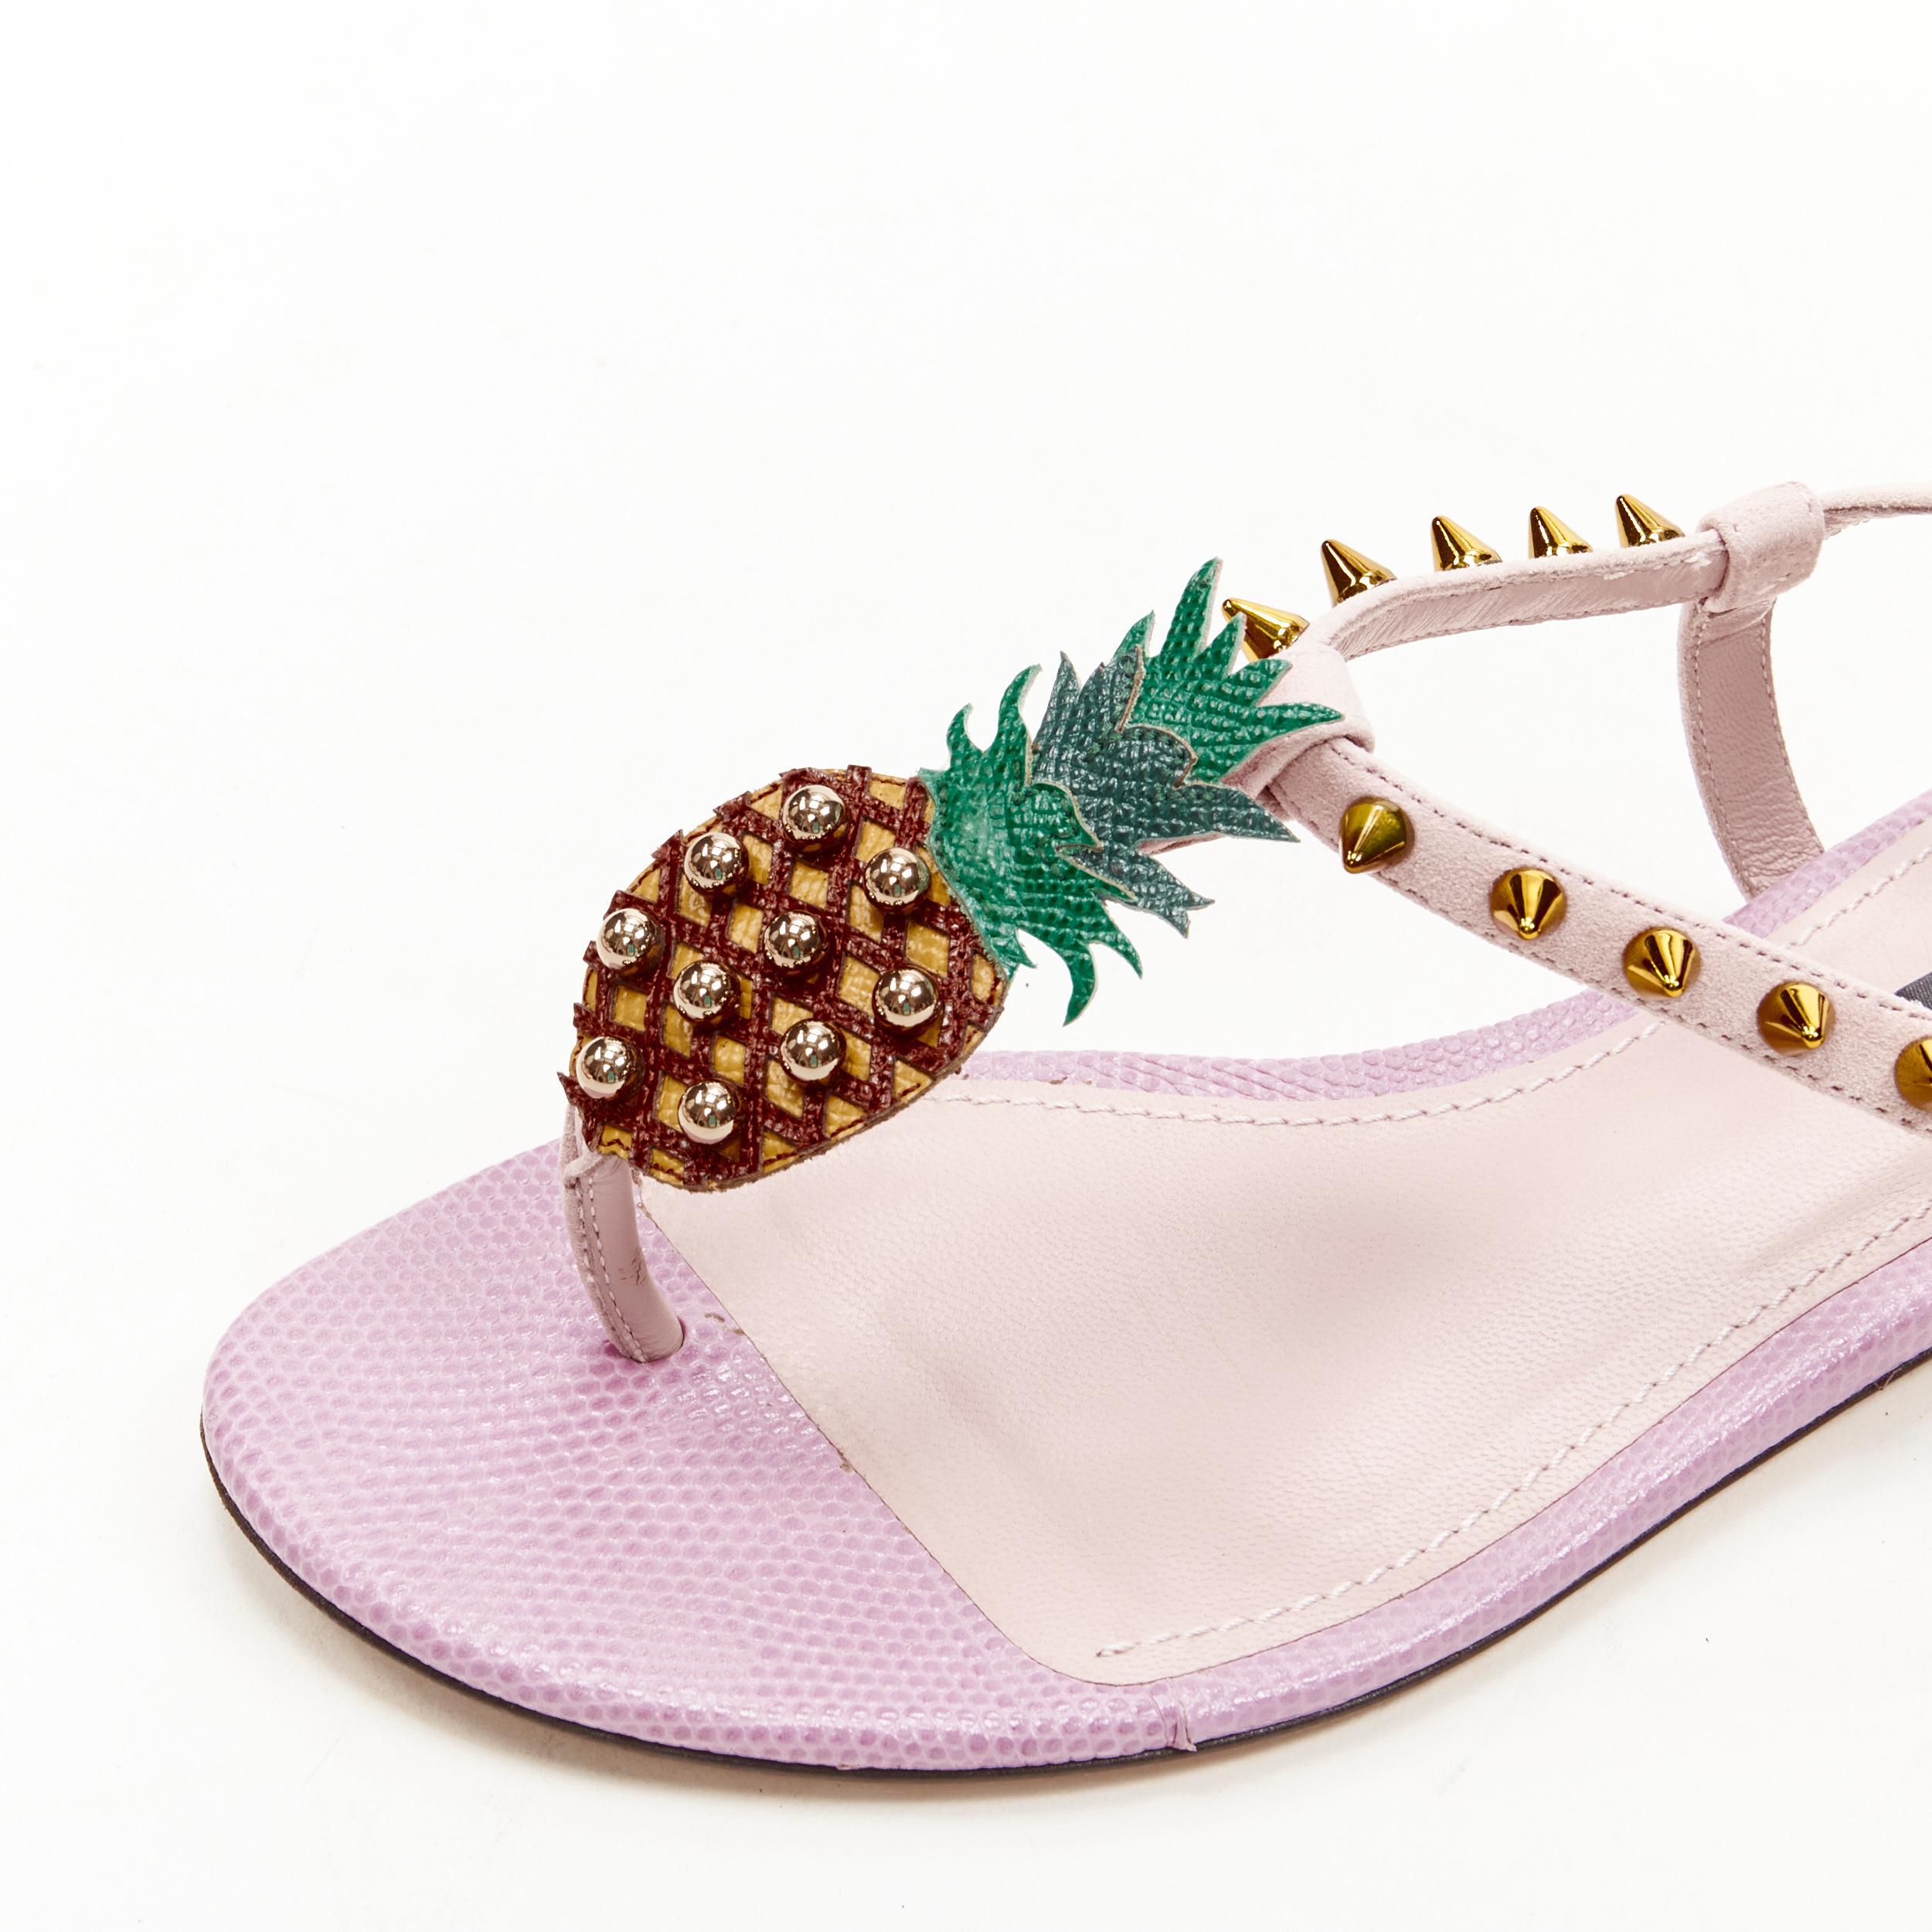 DOLCE GABBANA pink Pineapple studded thong flat sandals EU36.5 
Reference: ANWU/A00328 
Brand: Dolce Gabbana 
Material: Leather 
Color: Pink 
Pattern: Pineapple 
Closure: Buckle 
Extra Detail: Gold-tone studded hardware. 
Made in: Italy